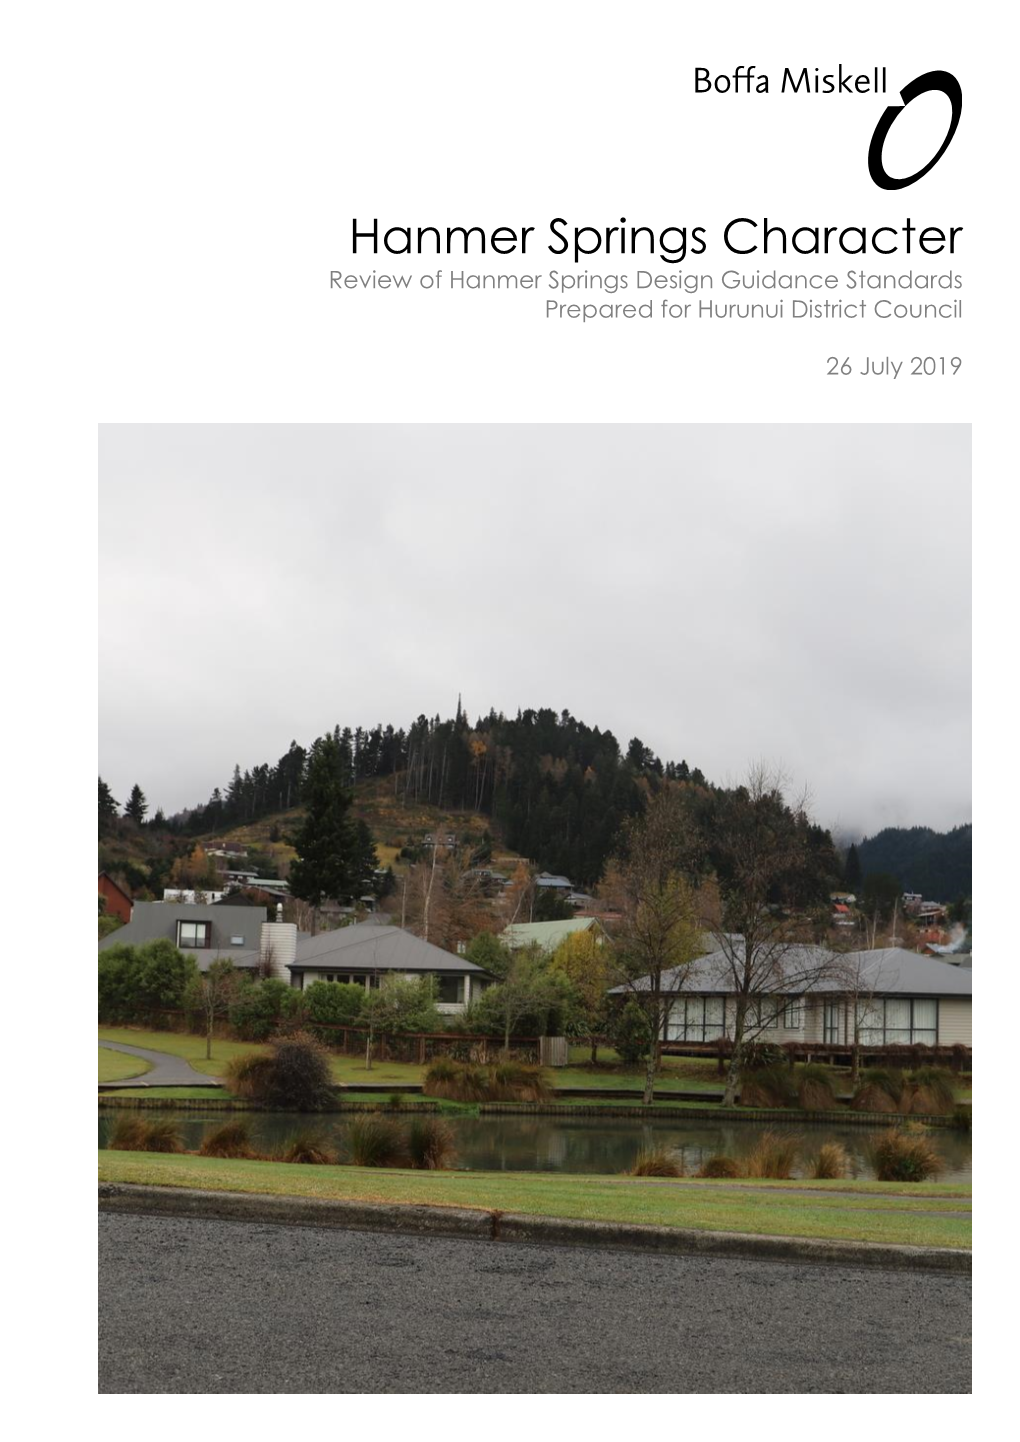 Hanmer Springs Character Review of Hanmer Springs Design Guidance Standards Prepared for Hurunui District Council